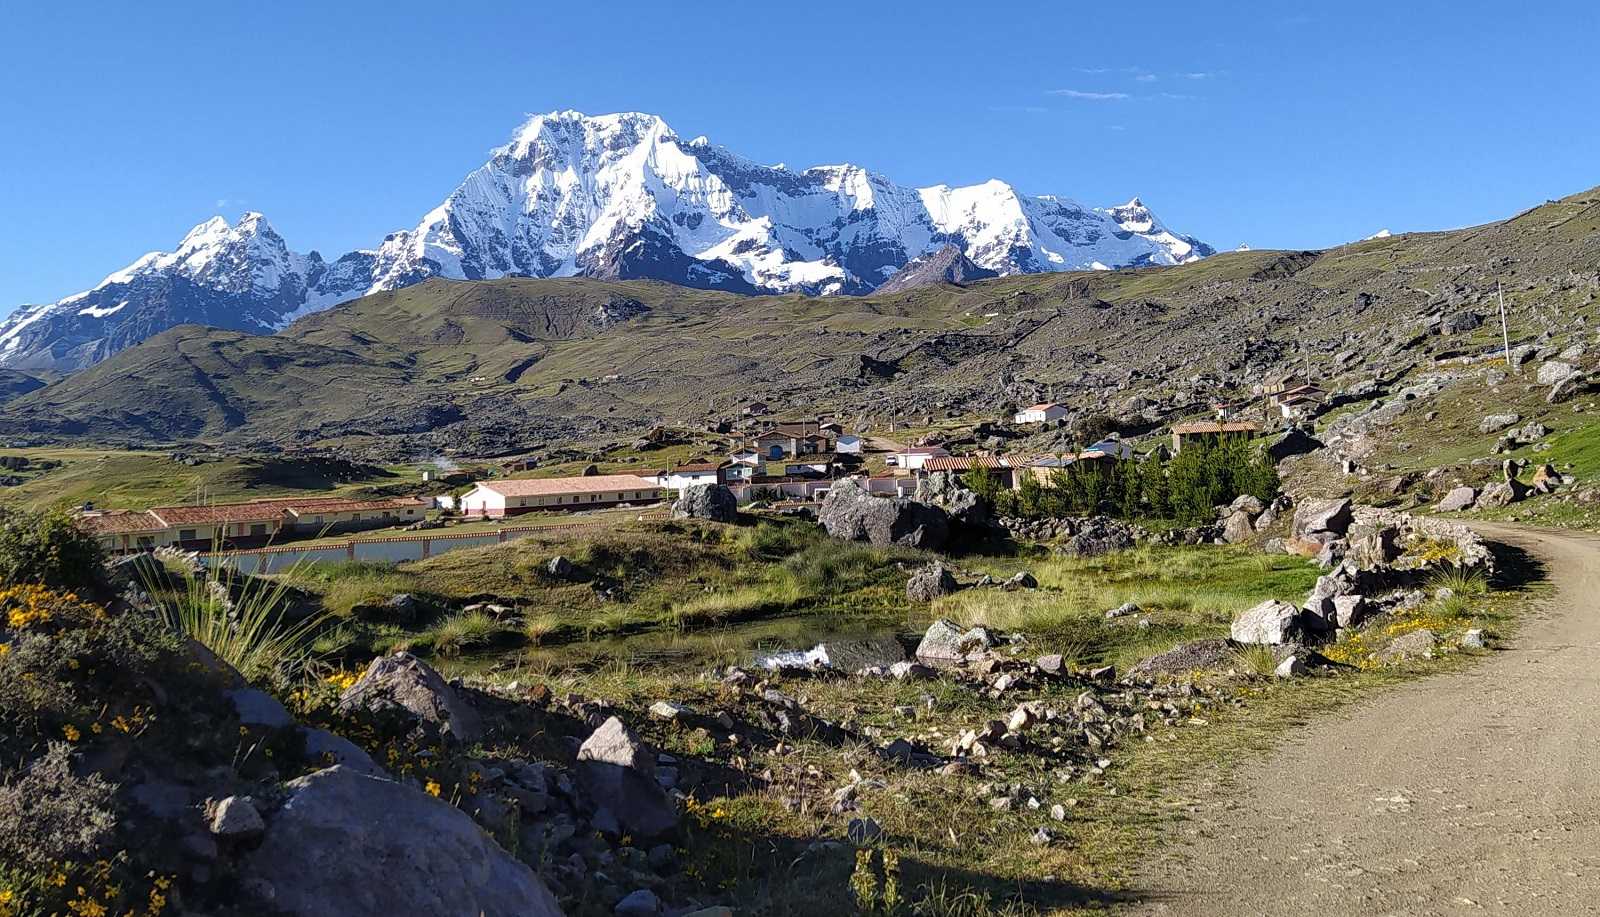 Experience the beauty and tradition of the Pacchanta community in the Andes mountain range